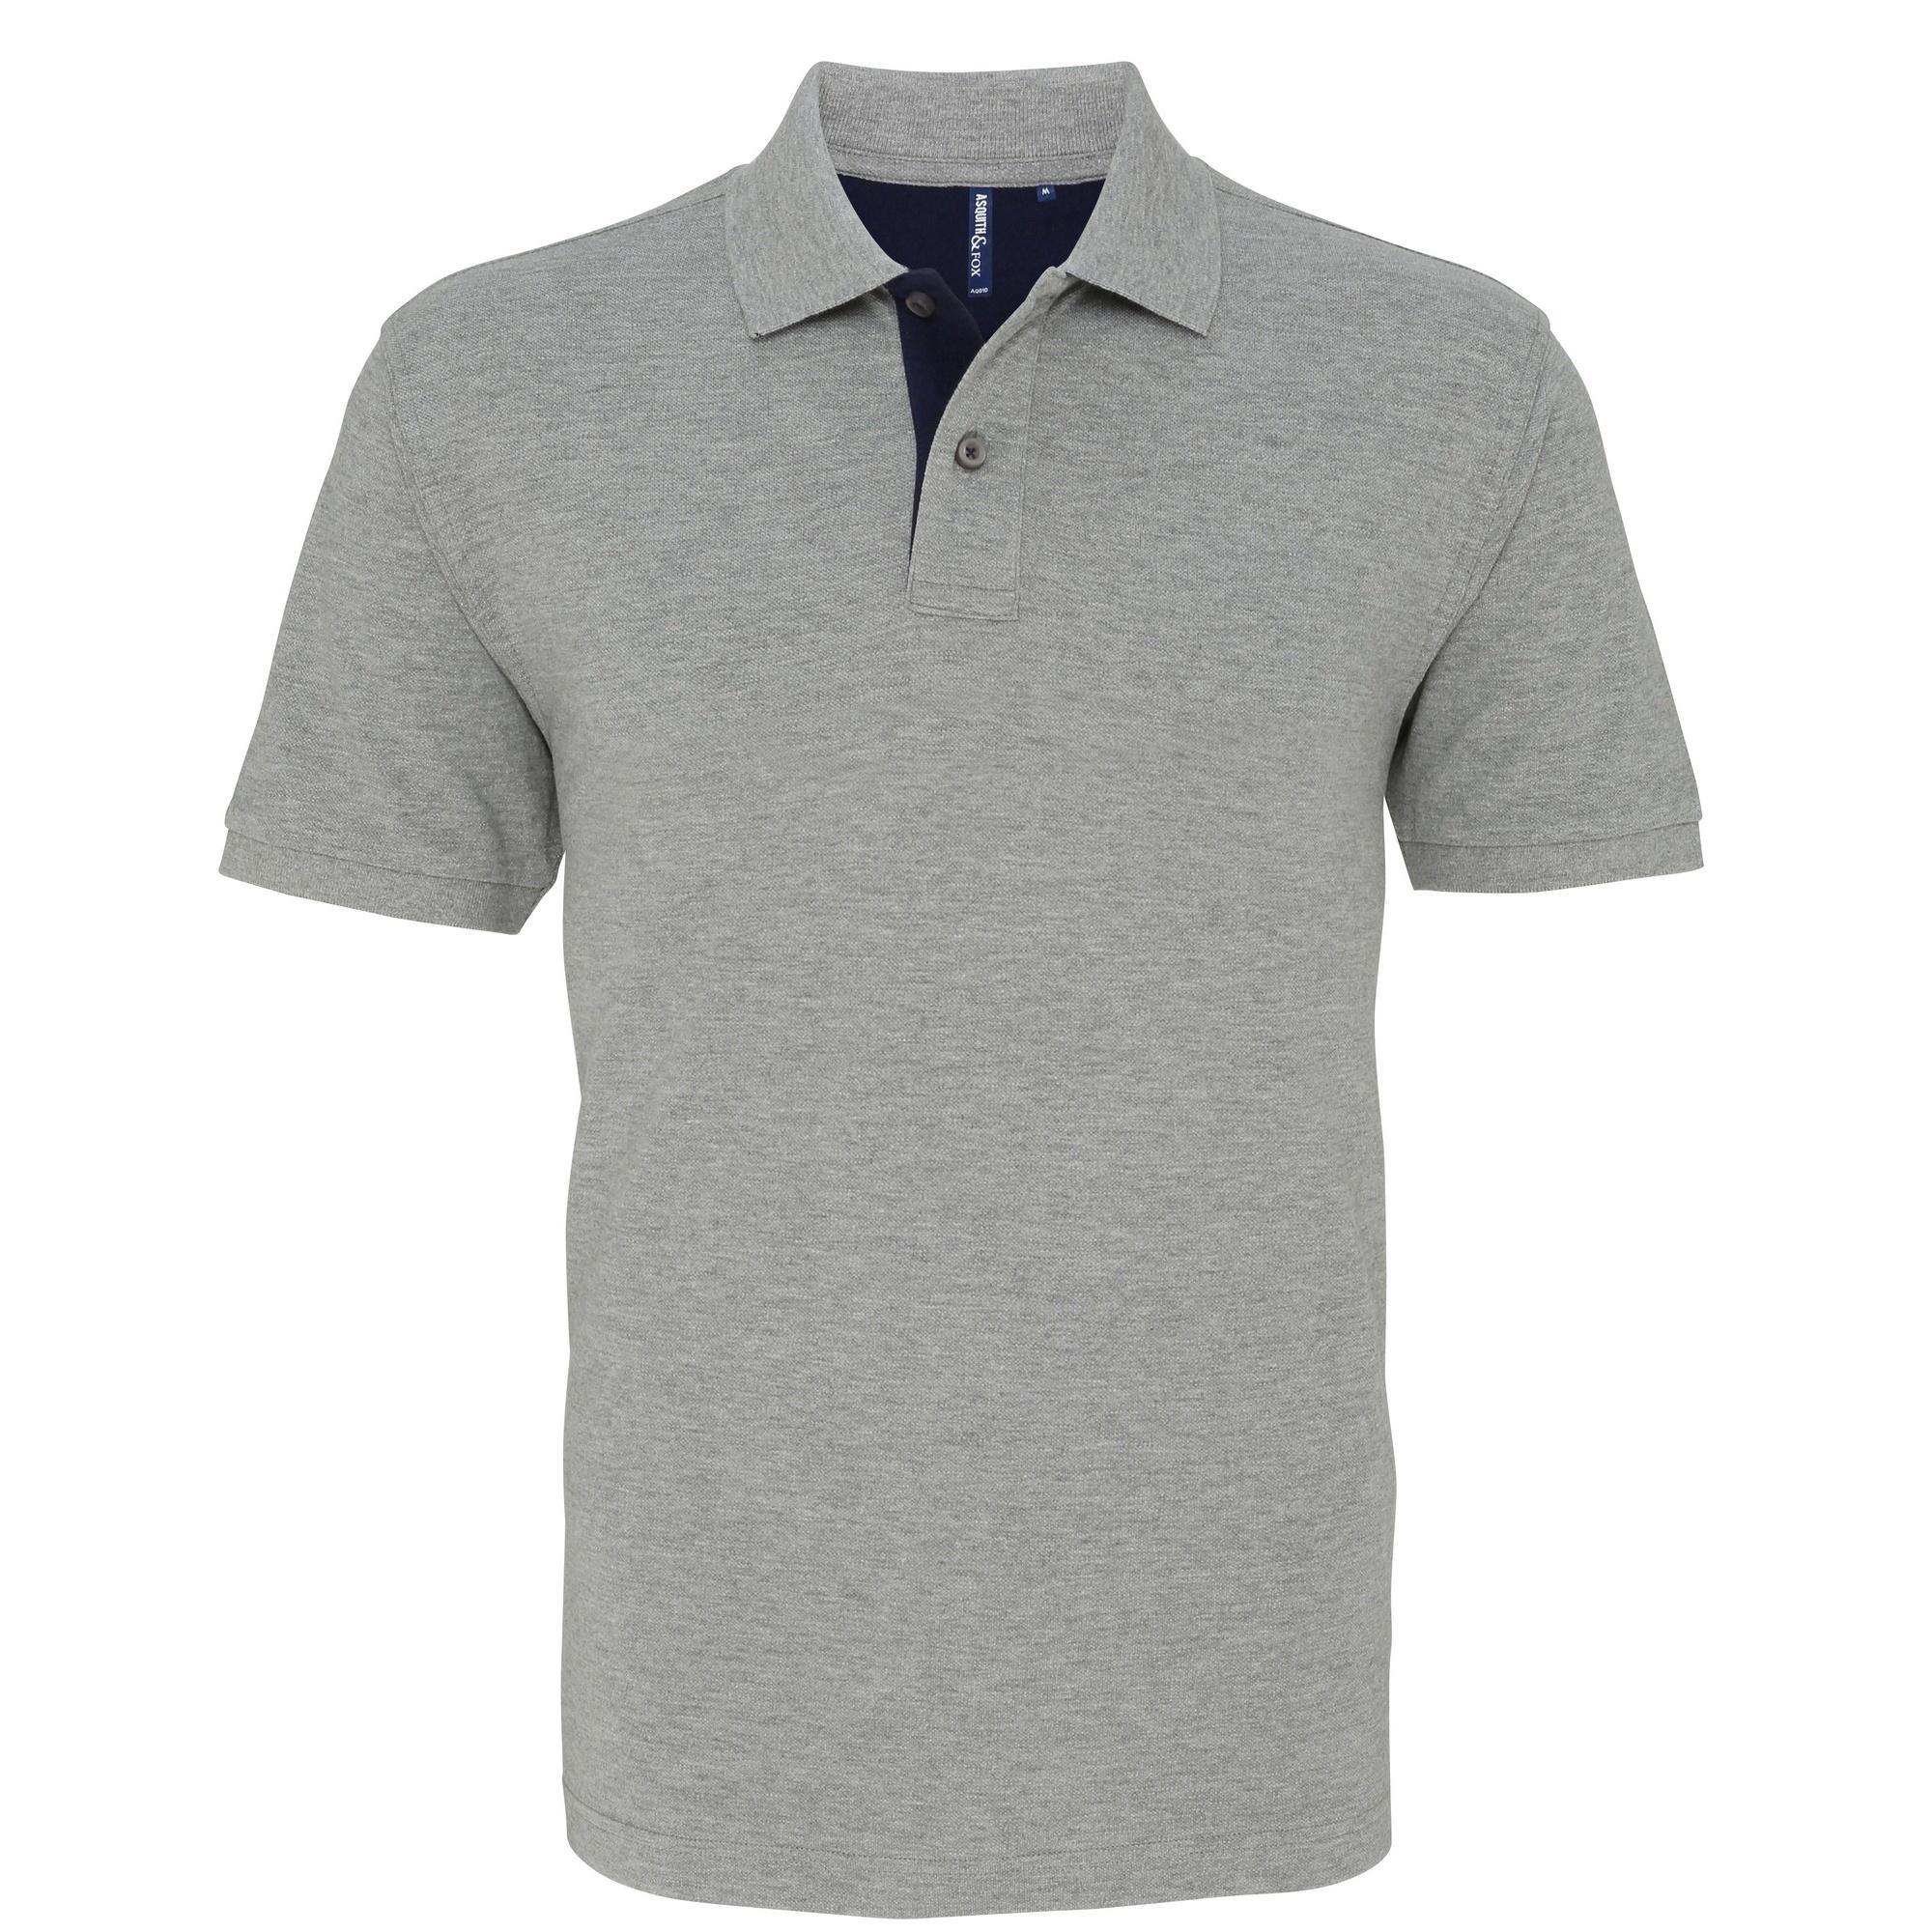 Asquith & Fox Mens Classic Fit Contrast Polo Shirt (Heather/ Navy) (M)